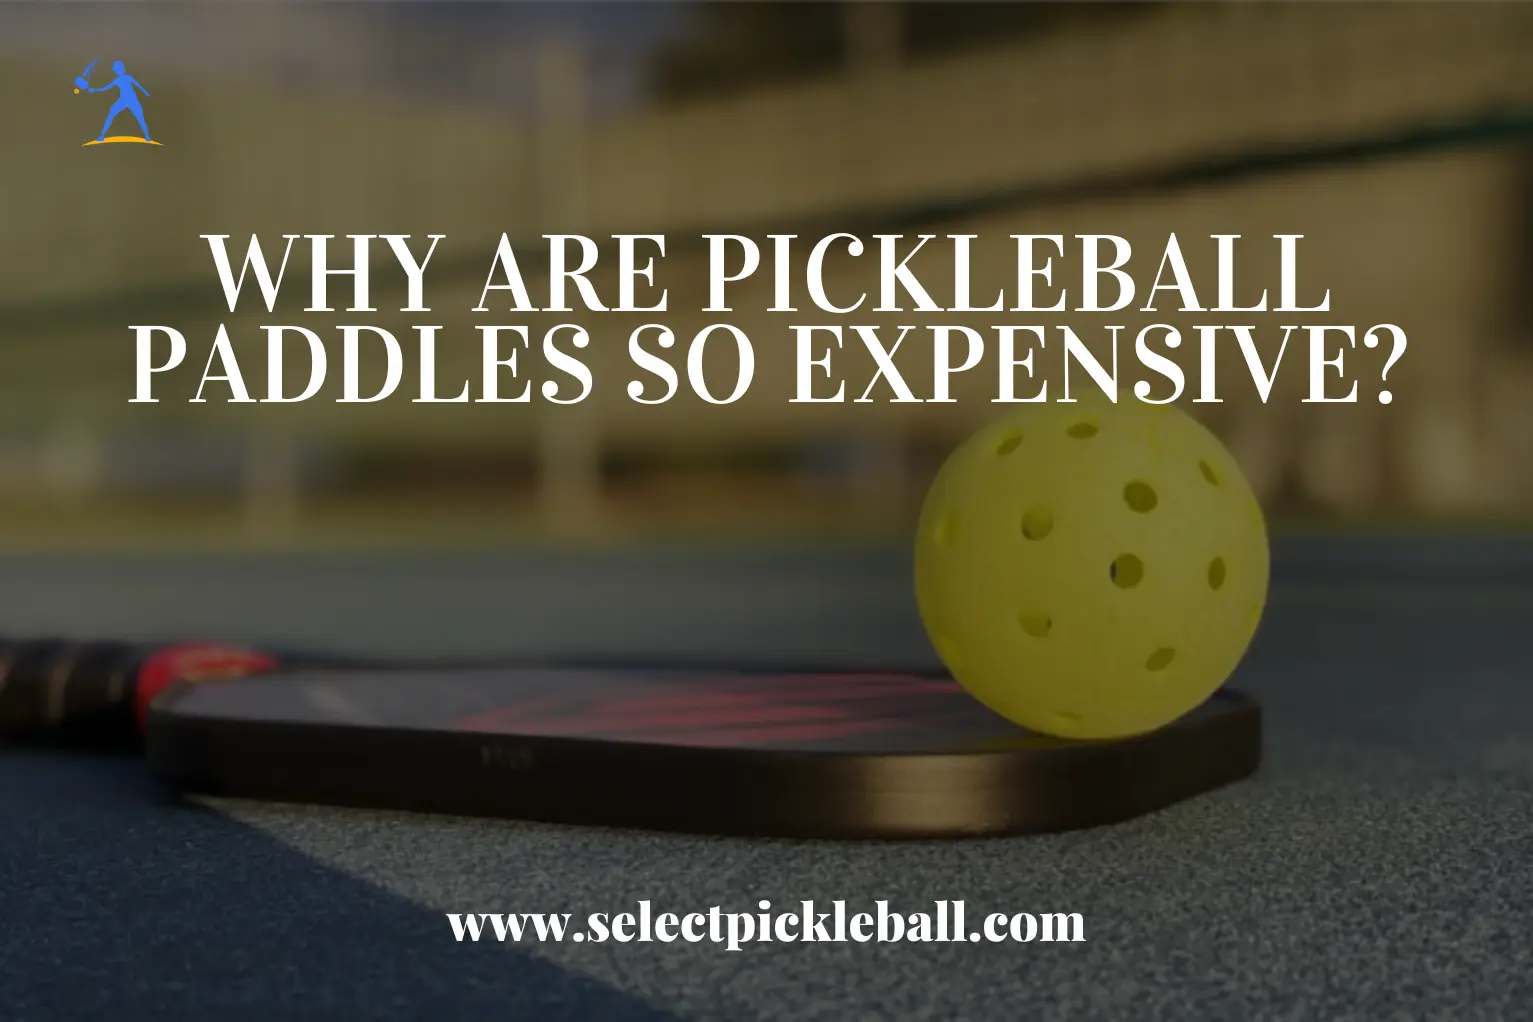 Why Are Pickleball Paddles So Expensive?